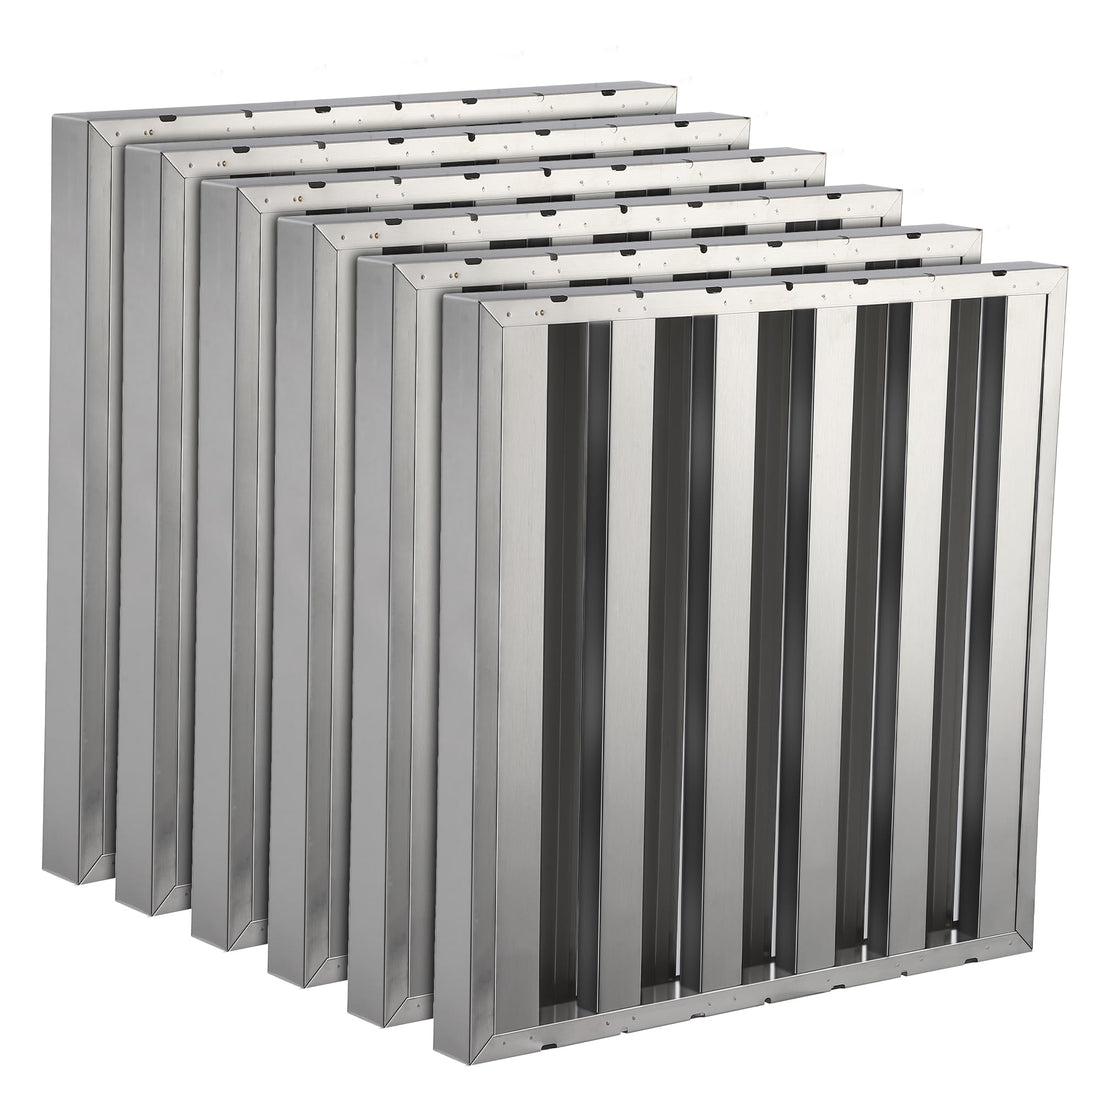 19.5x24.5" Range Hood Filters, 430 Stainless, 5 Grooves, 6-Pack